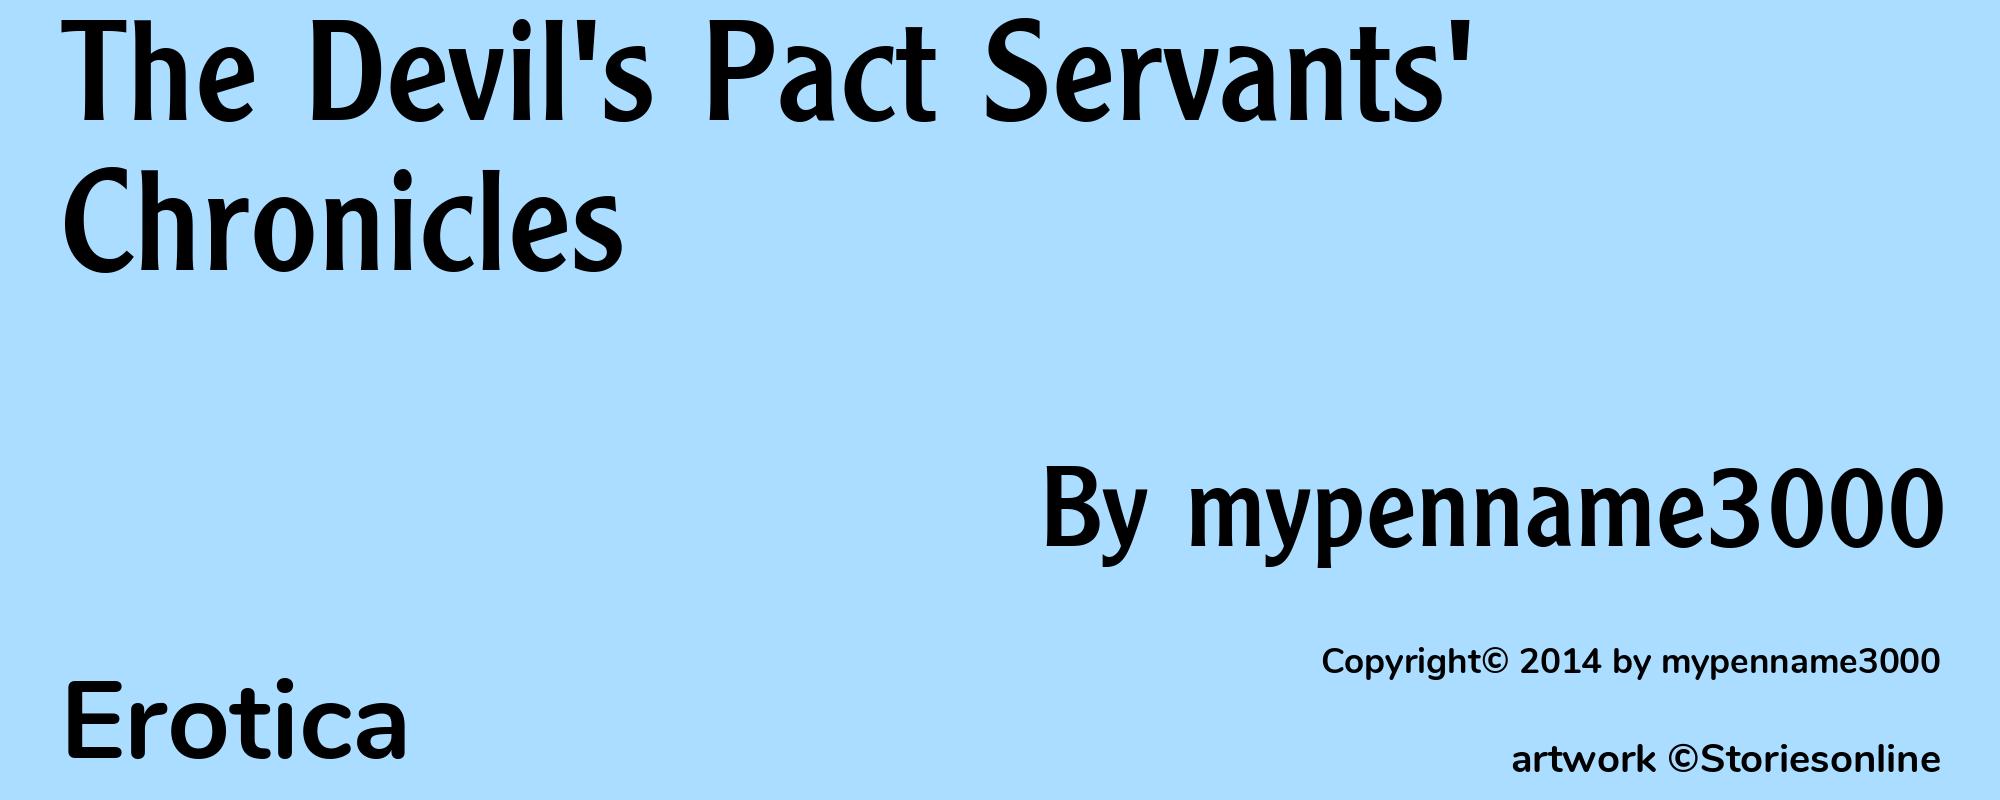 The Devil's Pact Servants' Chronicles - Cover